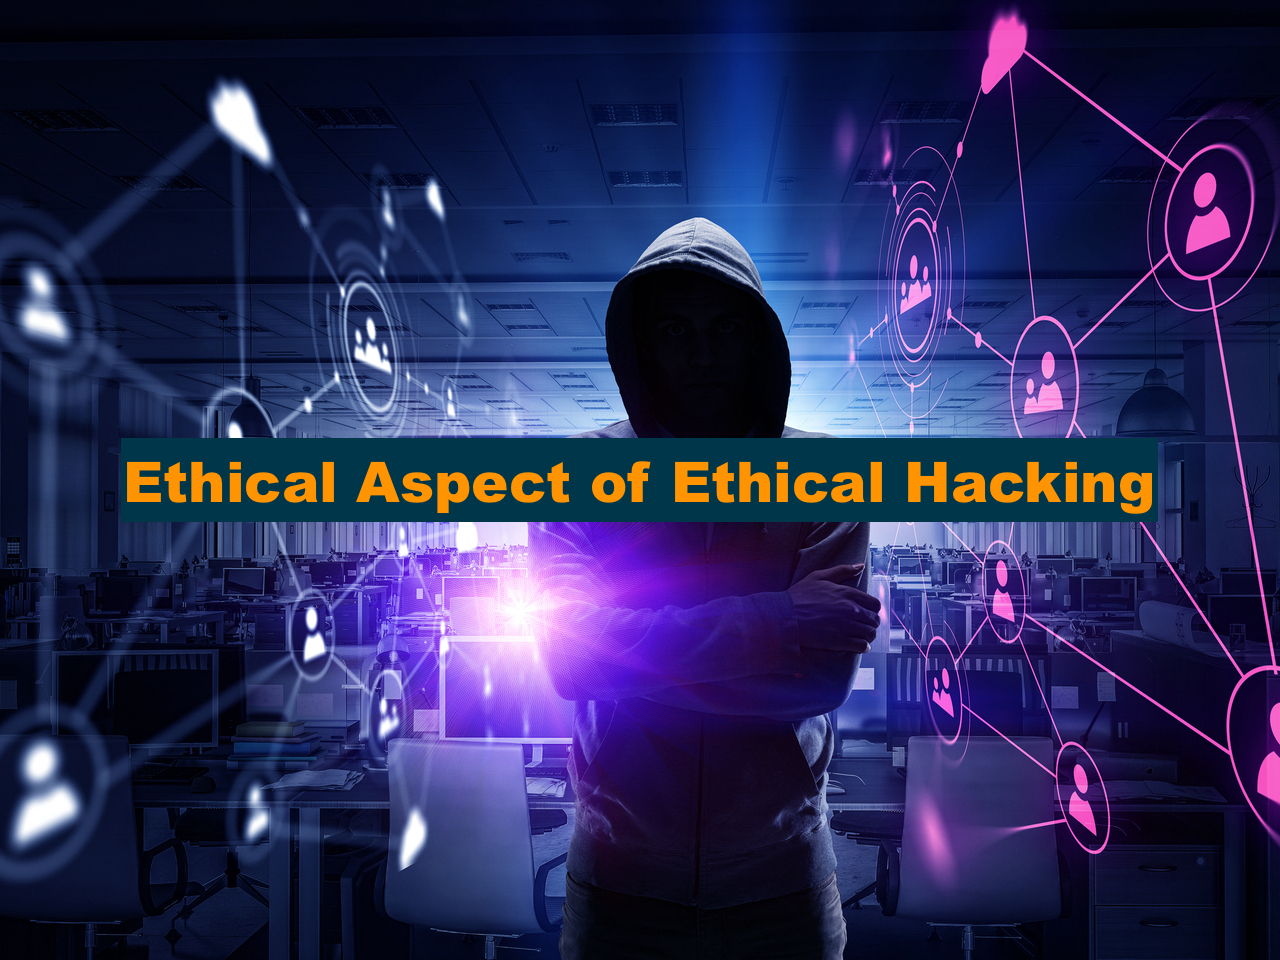 Ethical Aspect of Ethical Hacking